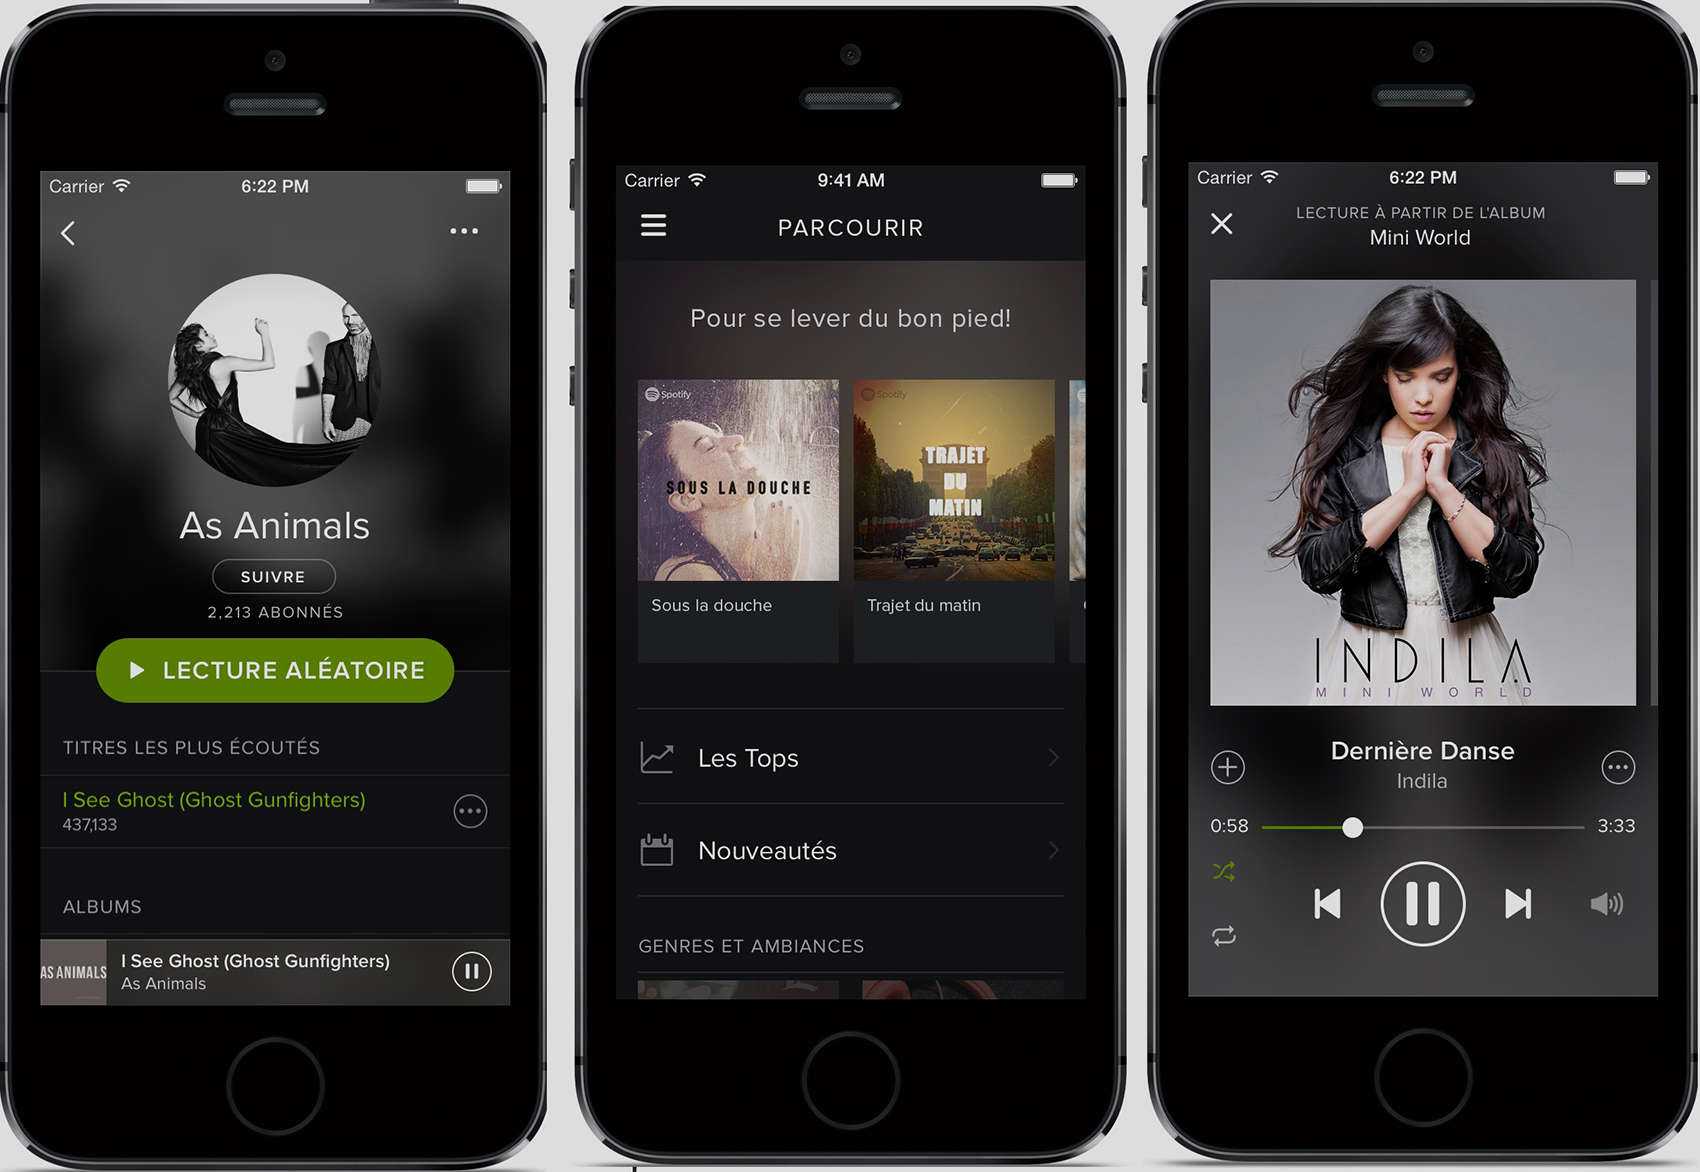 Spotify was the top-grossing App in the iPhone App Store.